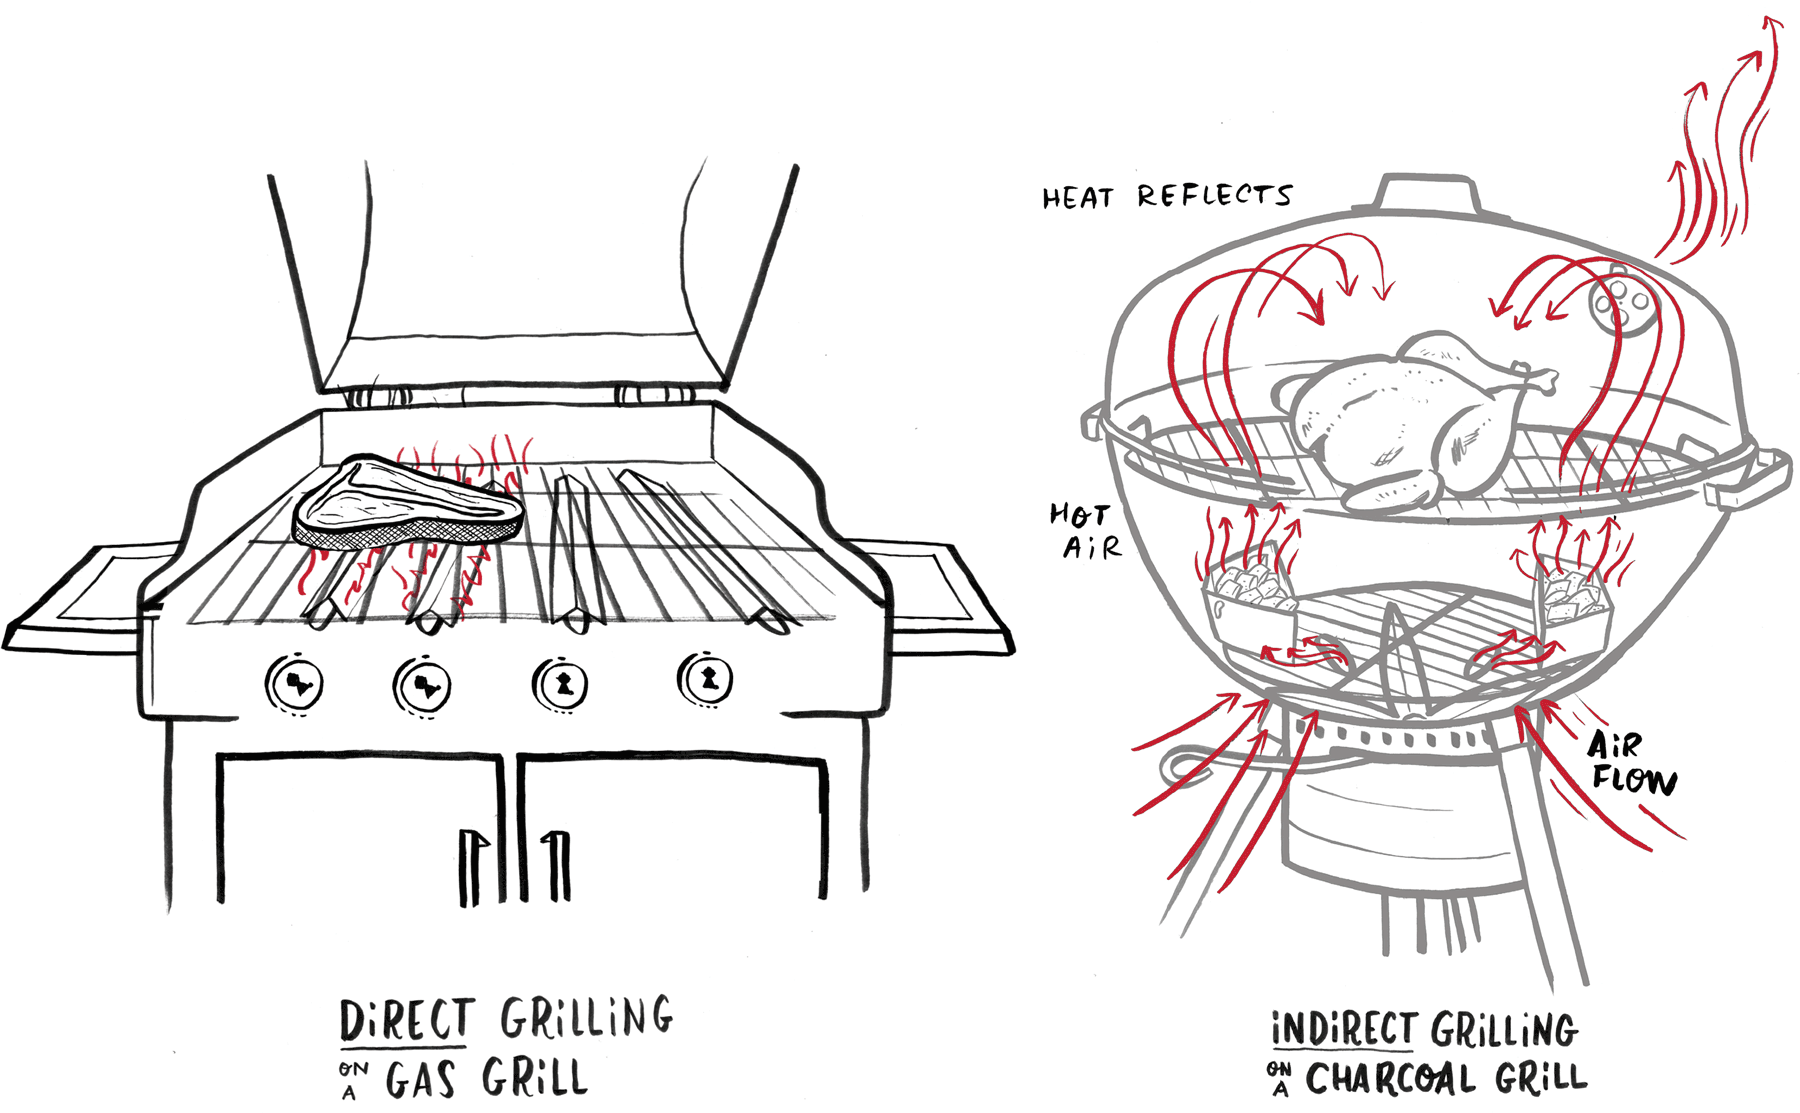 GAS GRILLS Lighting a Gas Grill The convenience and flexibility of a gas grill - photo 8